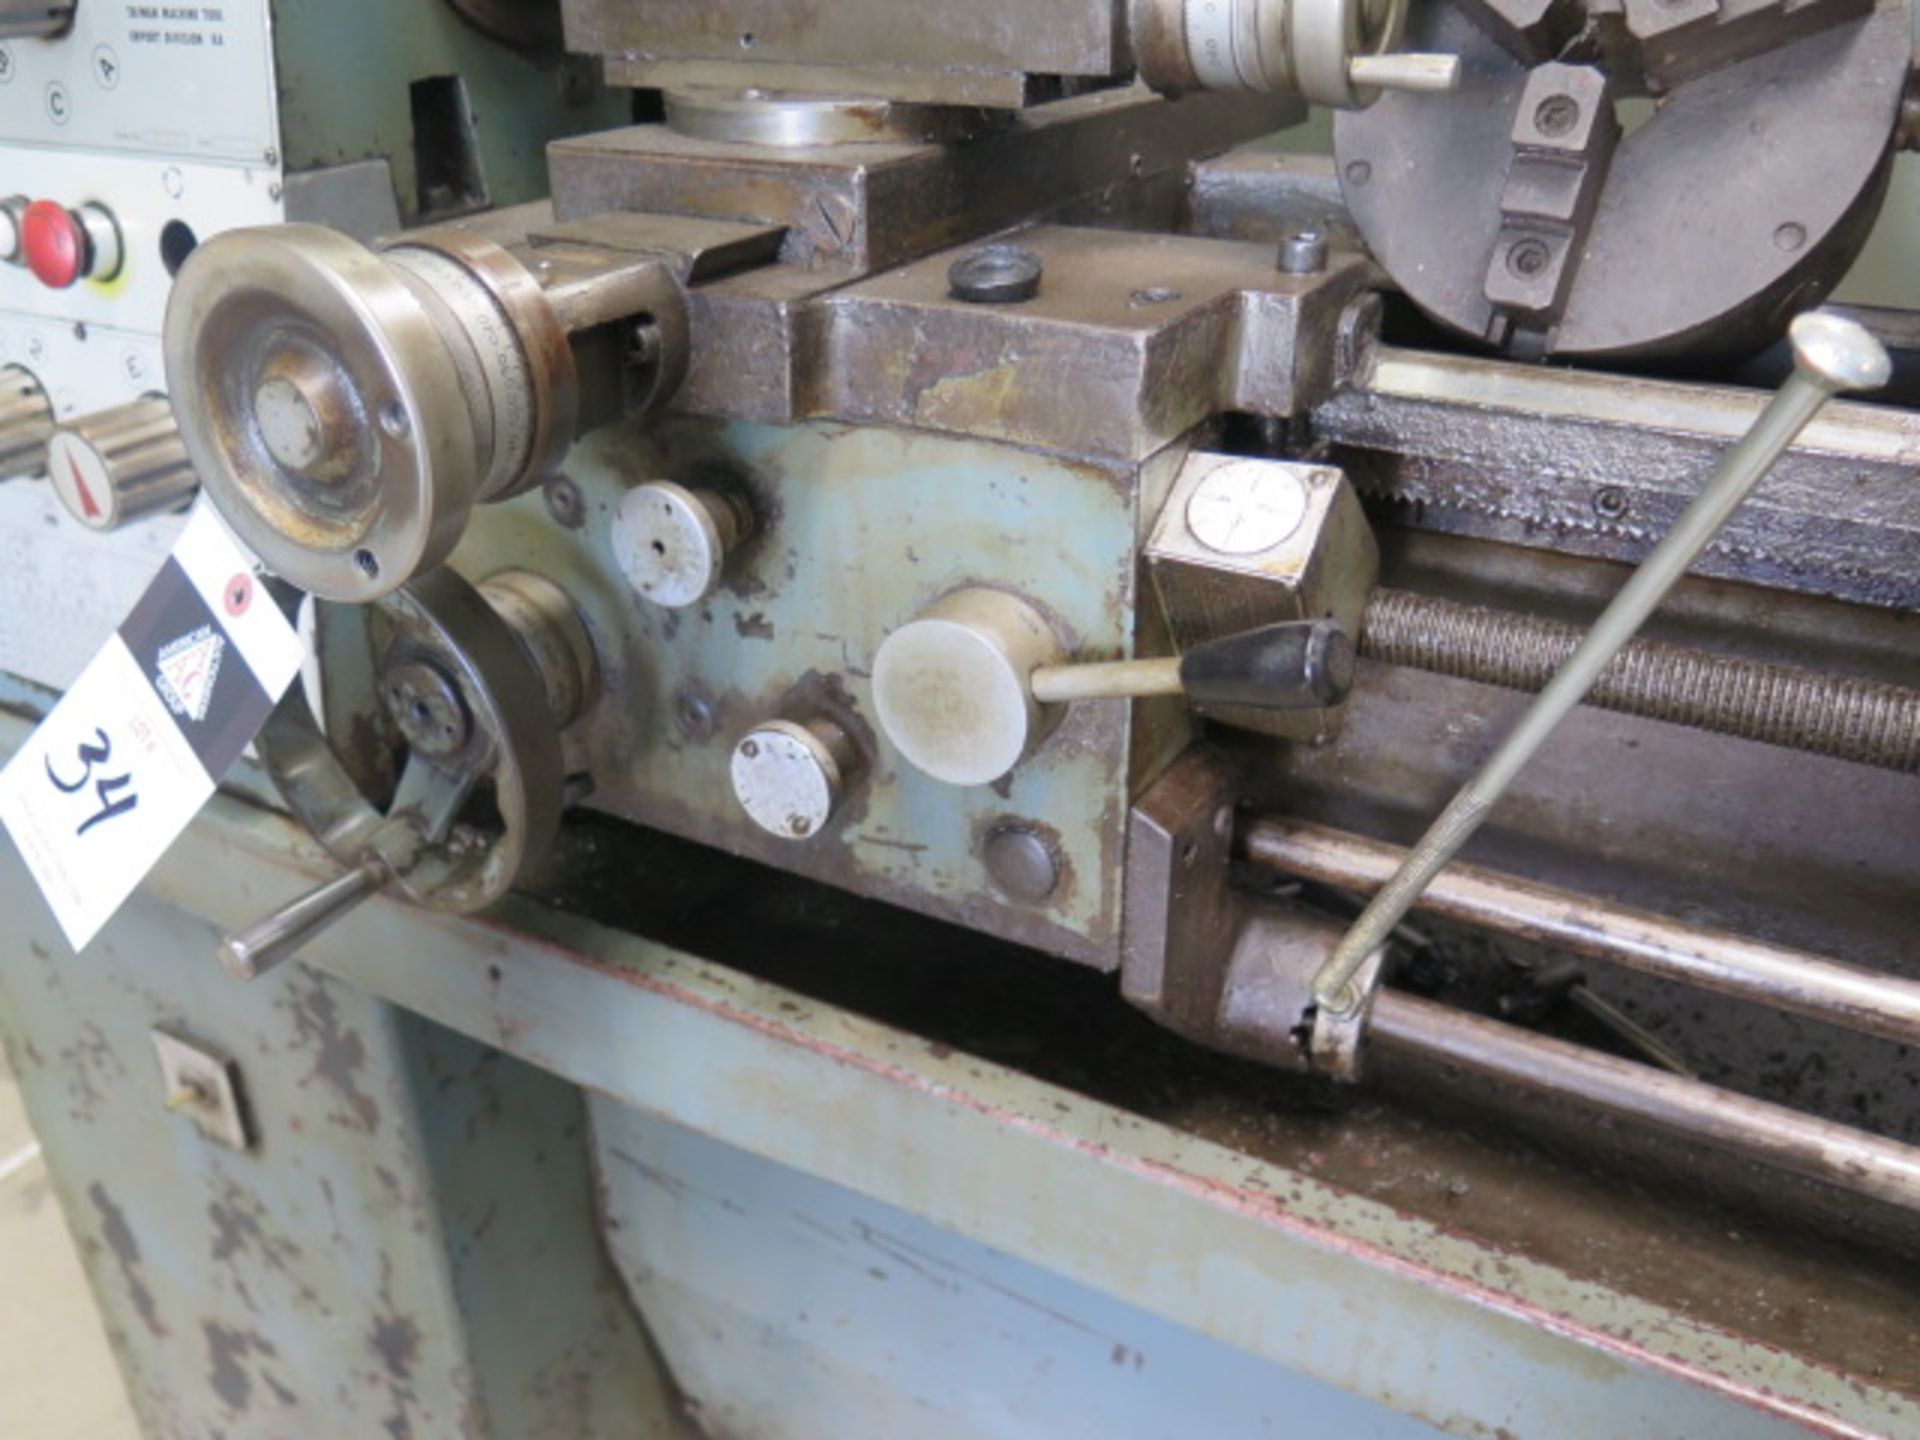 Ramco "Prince" 11" x 30" Geared Head Lathe s/n 4064 w/ 105-2000 RPM, Inch/mm Threading, Tailstock, - Image 16 of 17